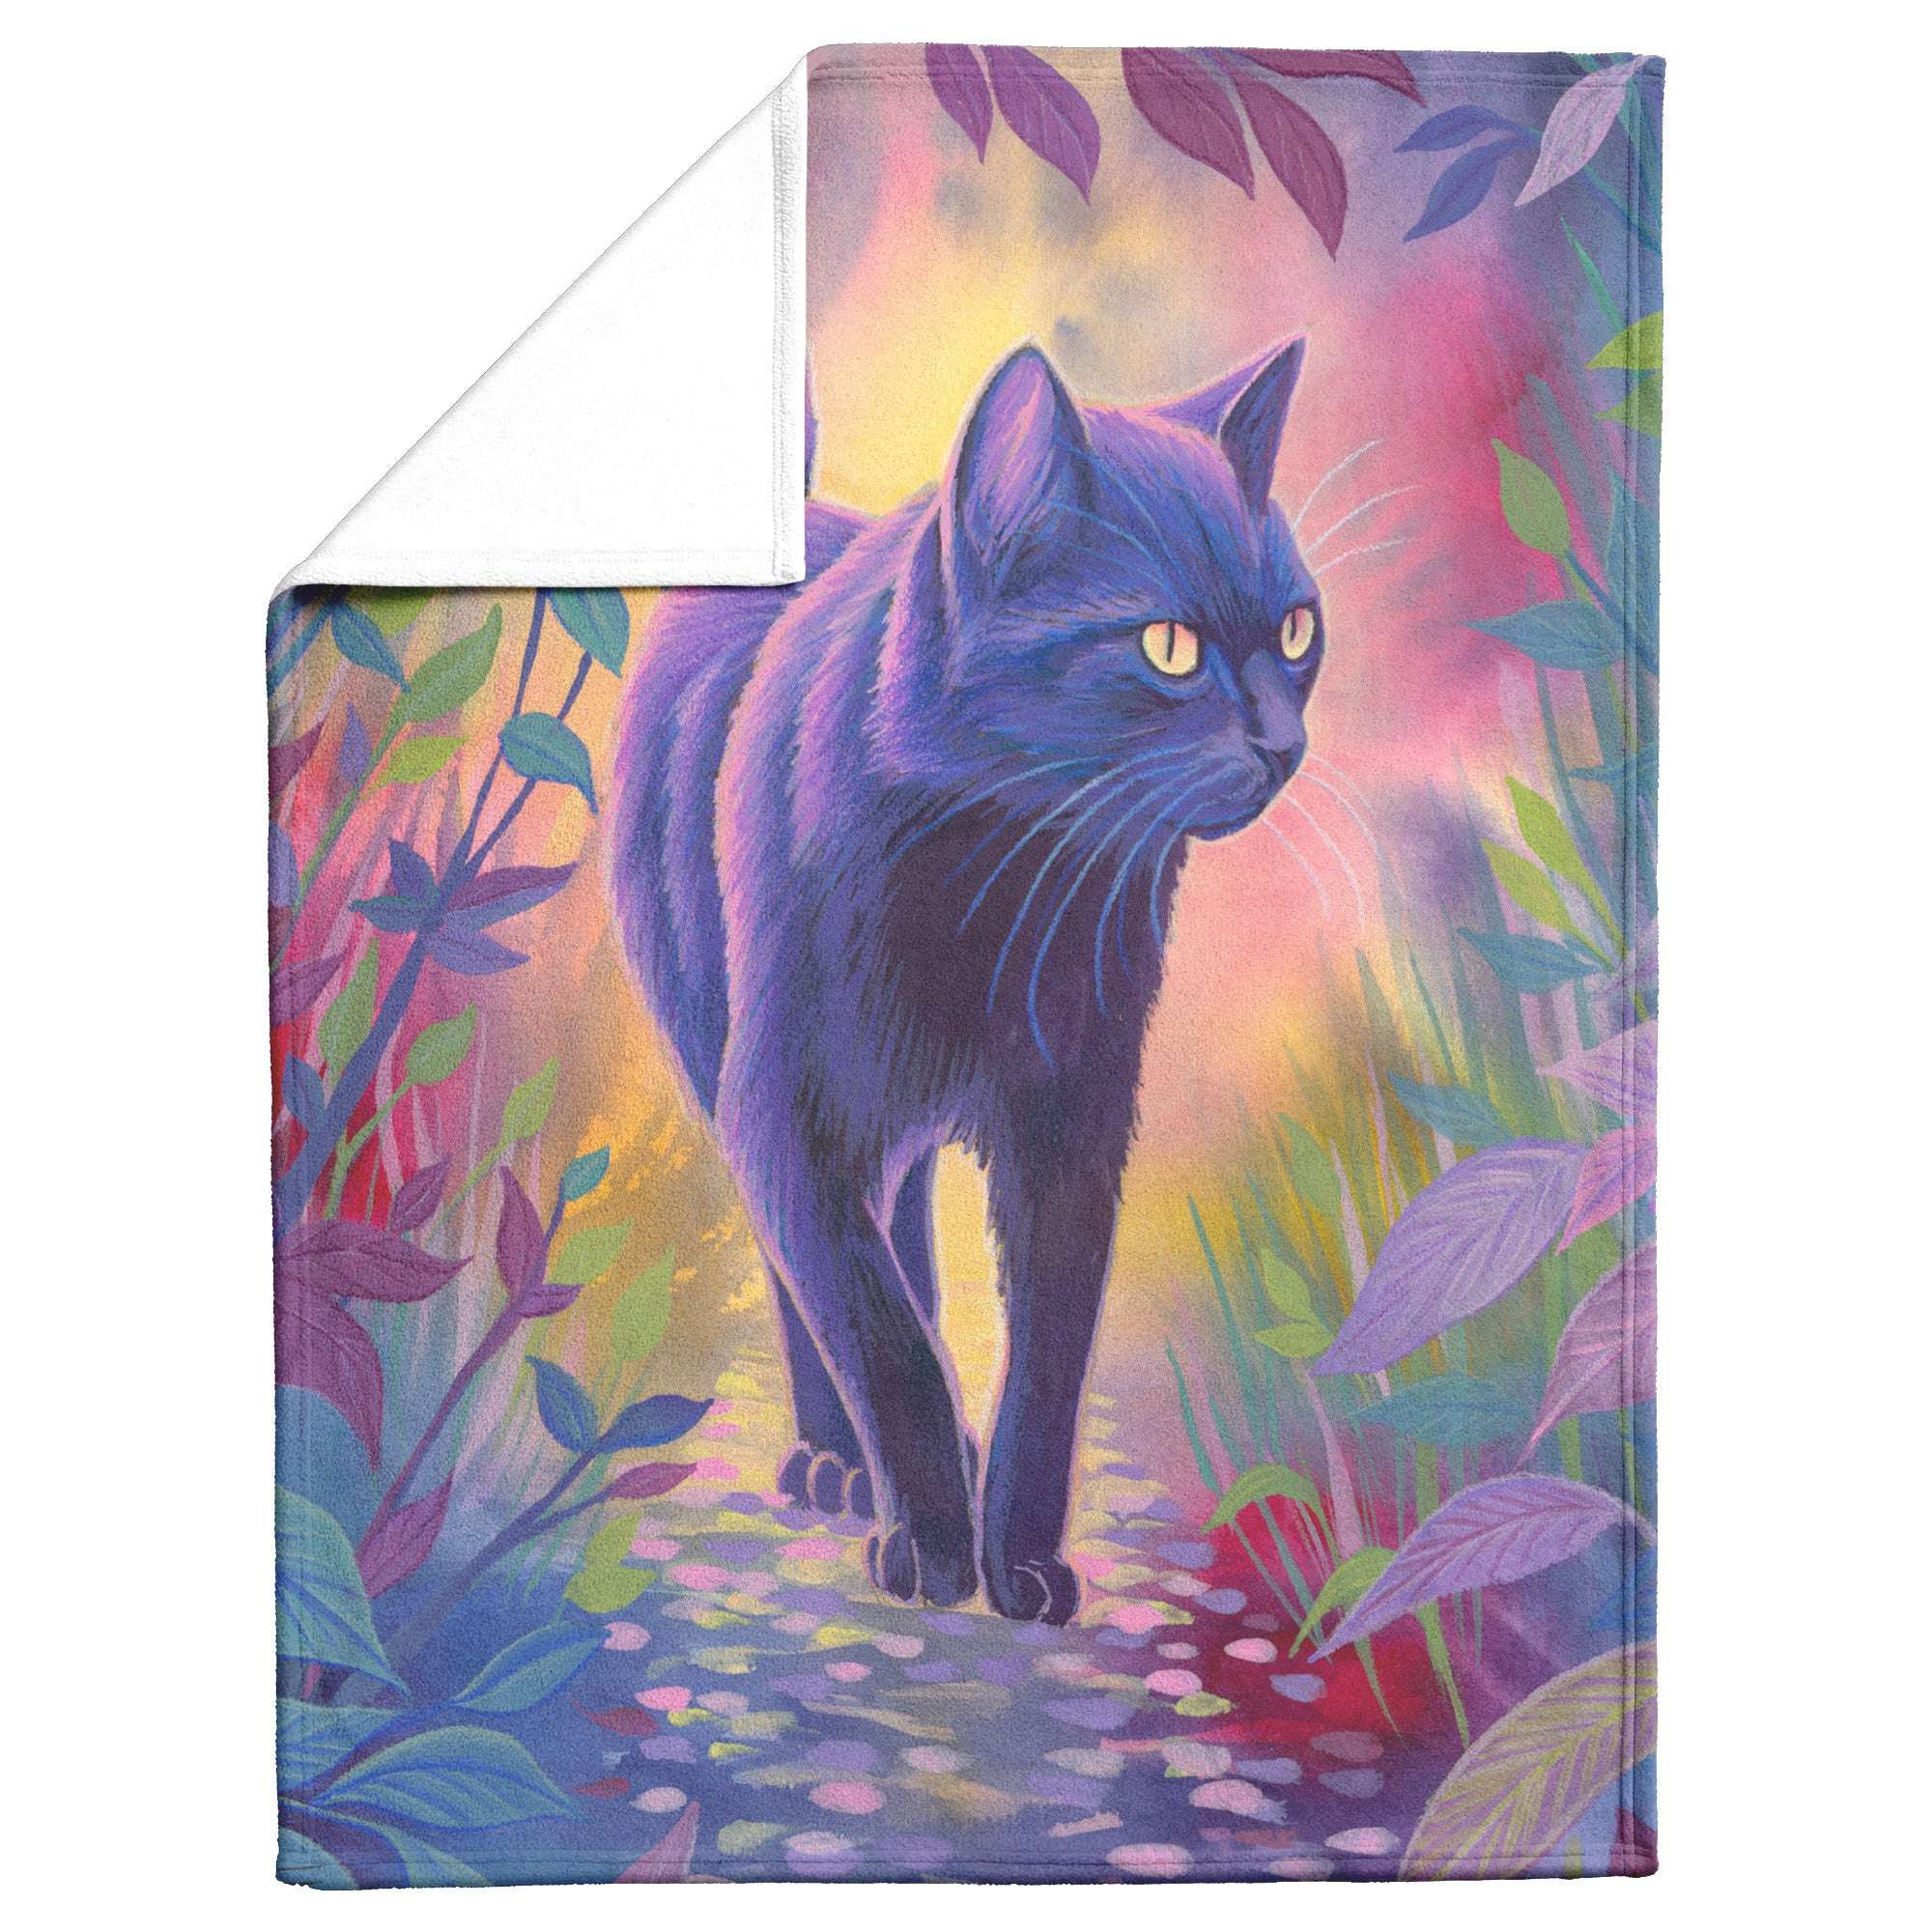 Cat blanket with a vibrant painting of a black cat walking on a cobblestone path surrounded by colorful foliage.